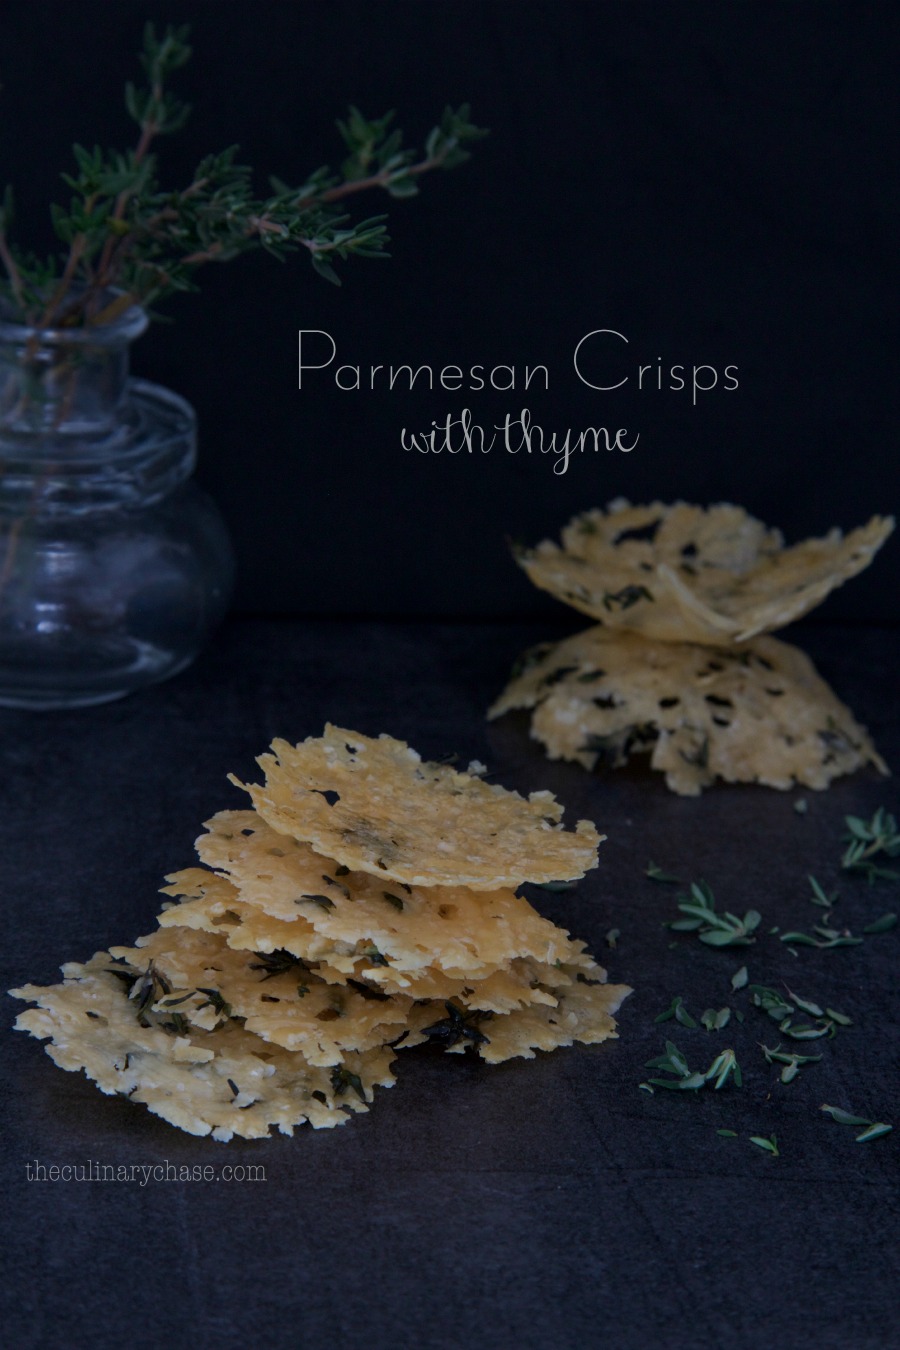 Parmesan Crisps with Thyme